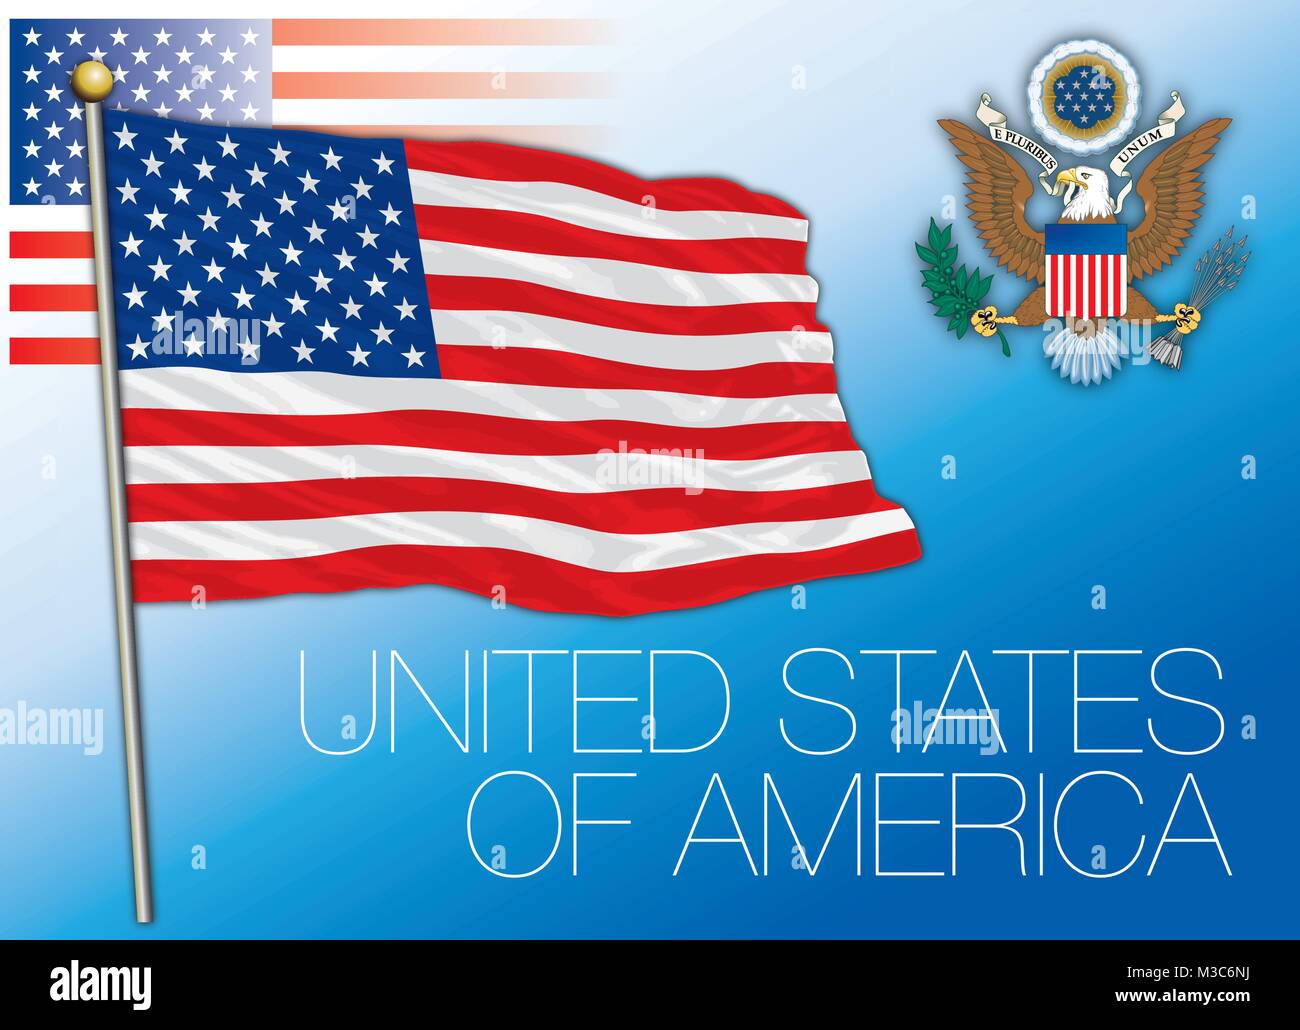 United States of America flag and seal Stock Vector